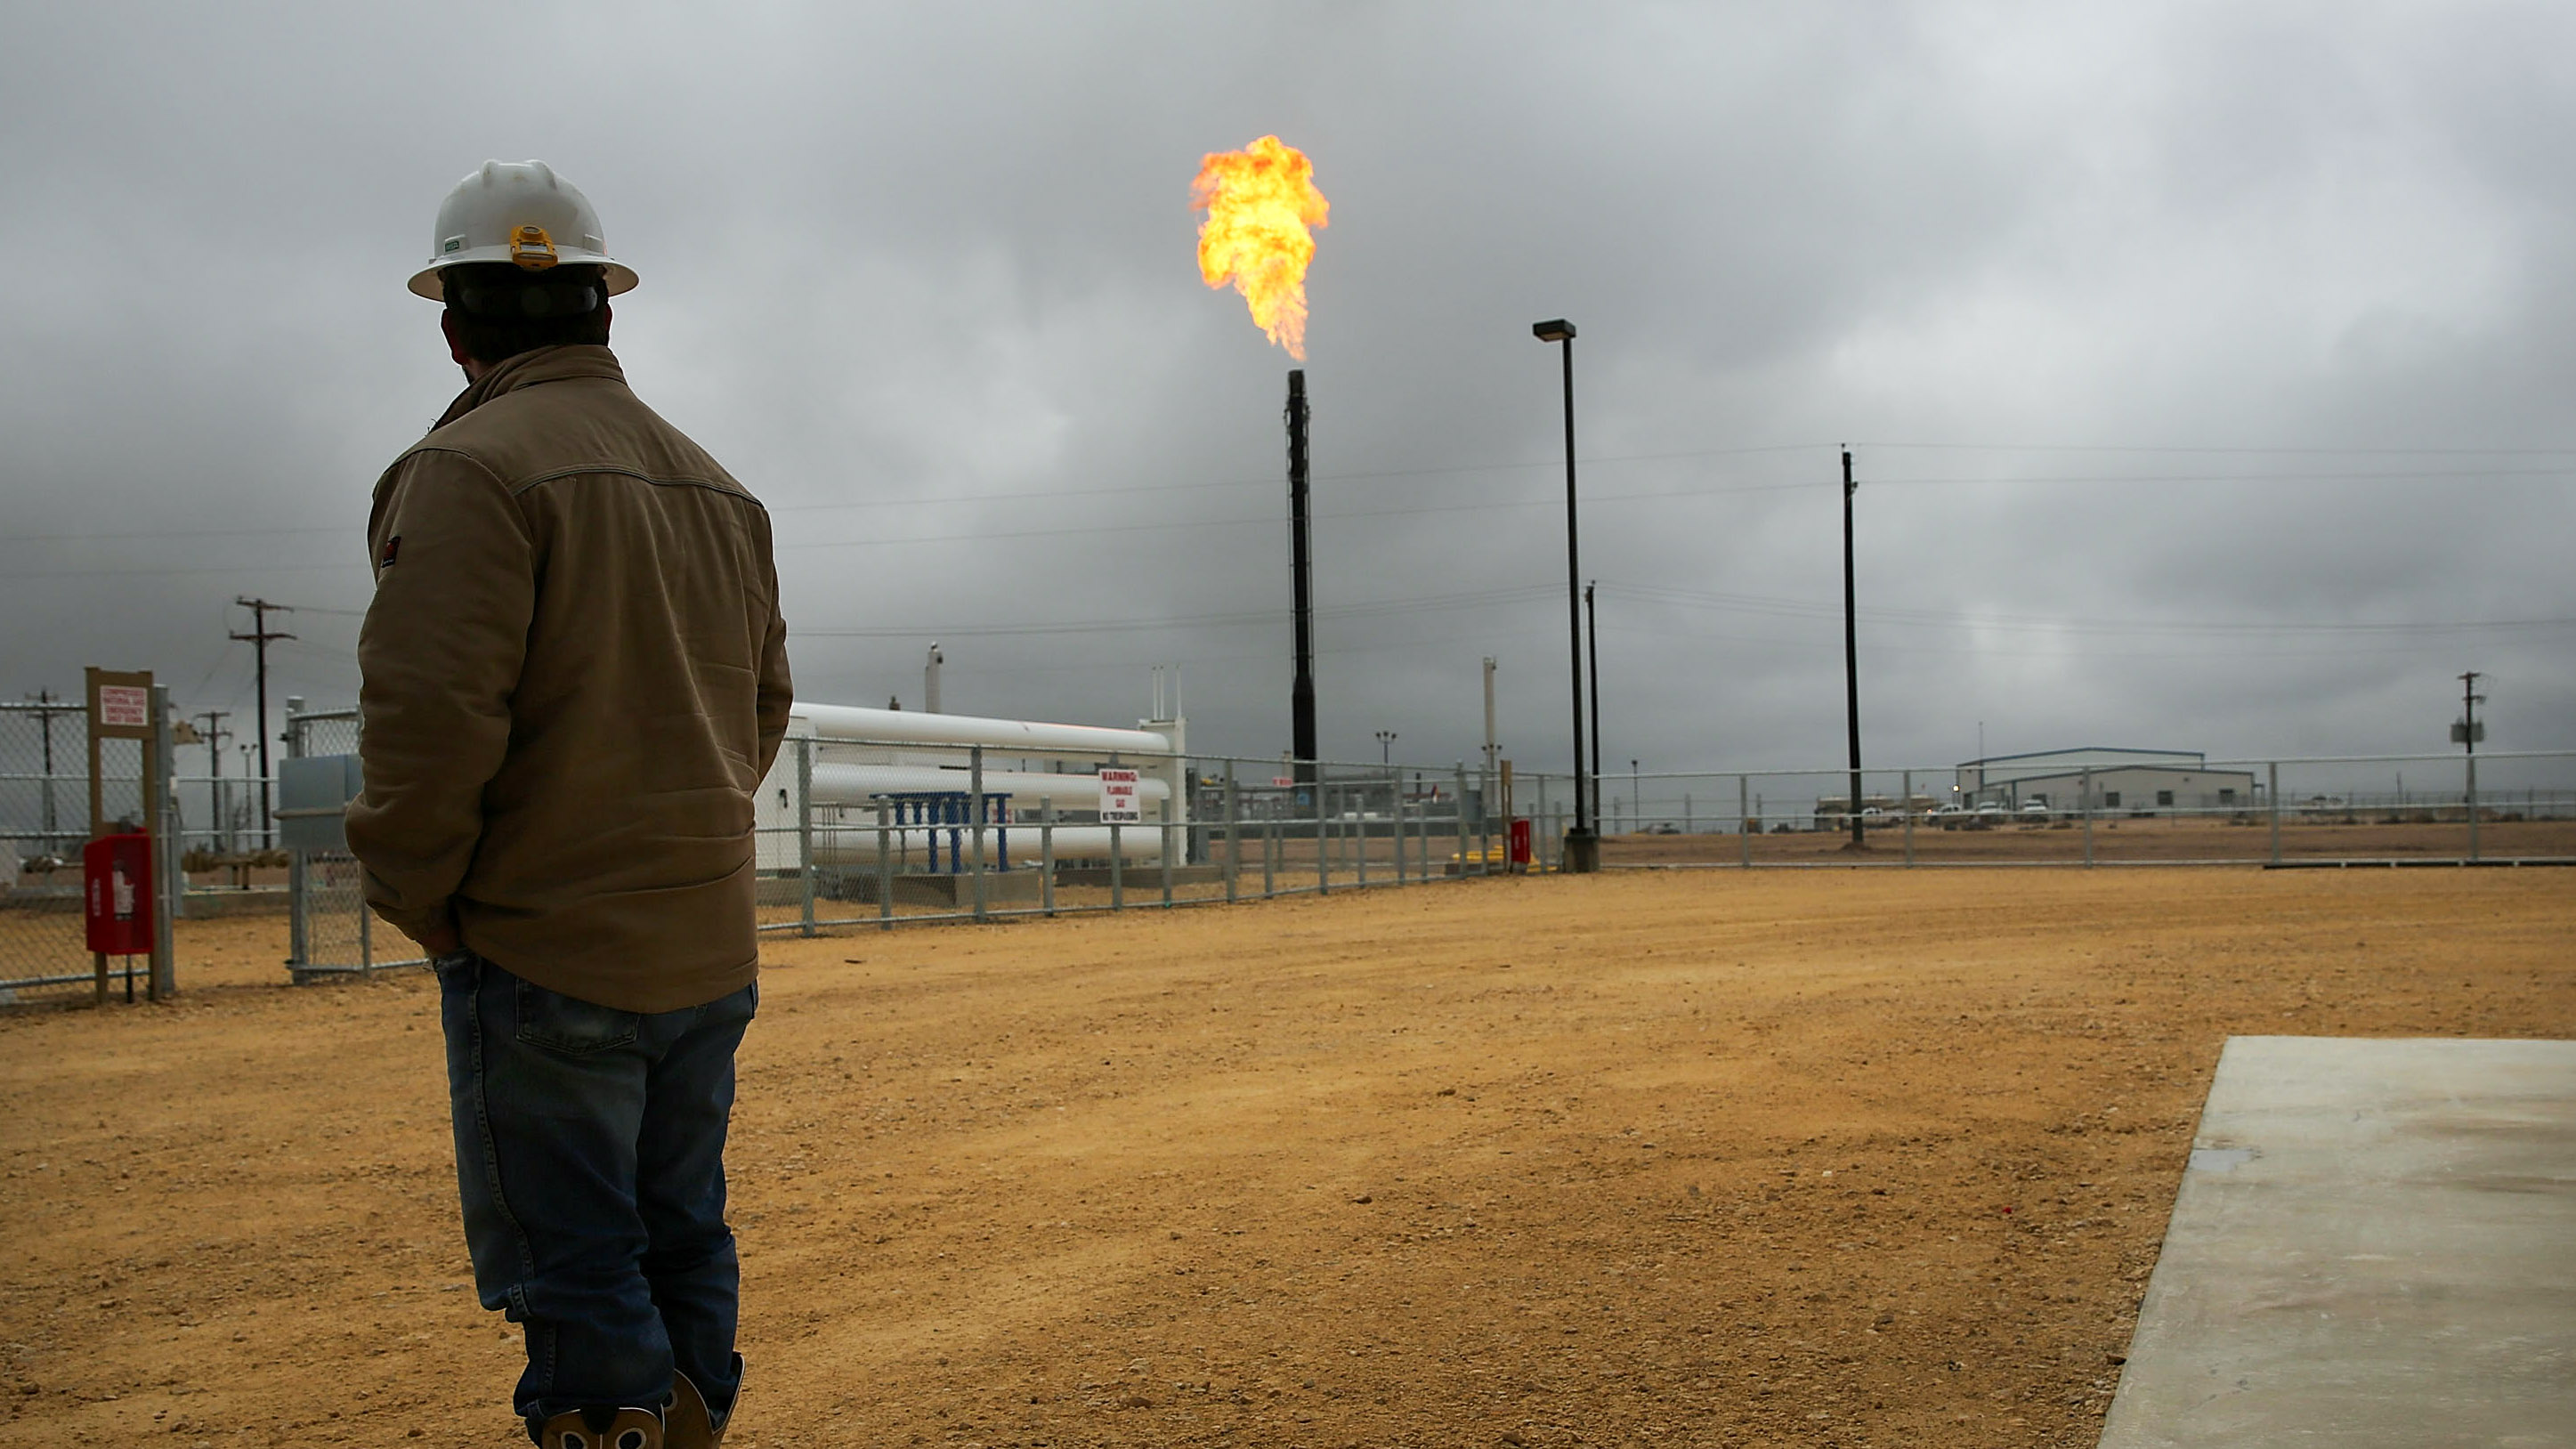 worker in hard hat at the Deadwood natural gas plant looks toward the flared natural gas burning in the distance